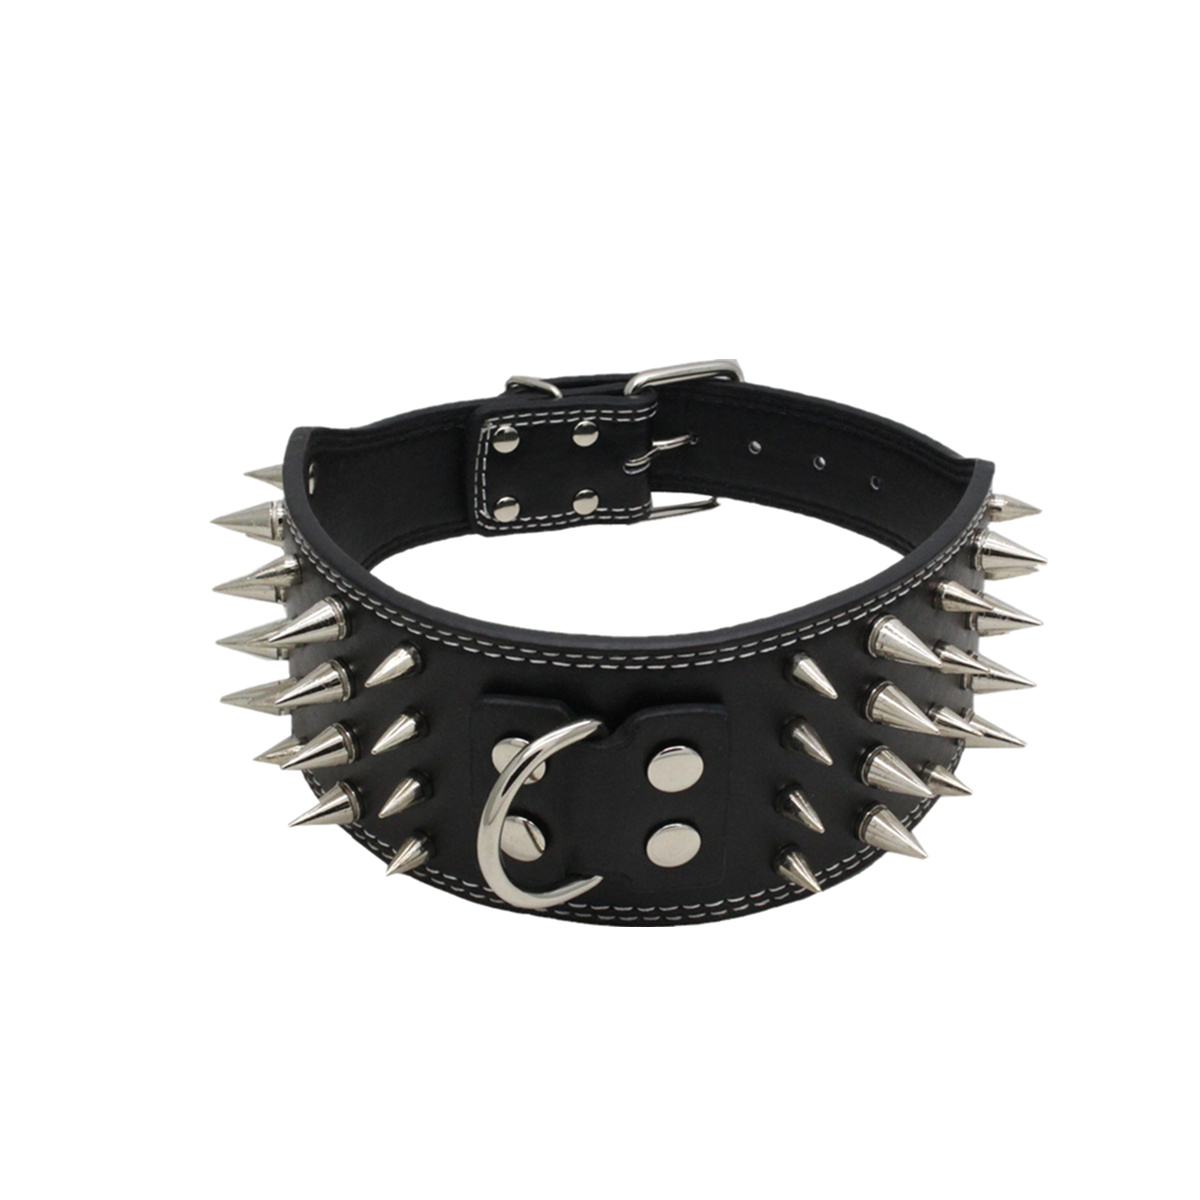 Four-Rows-of-Black-Nail-Anti-bite-Tactical-Collar-Large-Pet-Dog-Chain-Hunting-Dog-Supplies-1398082-3